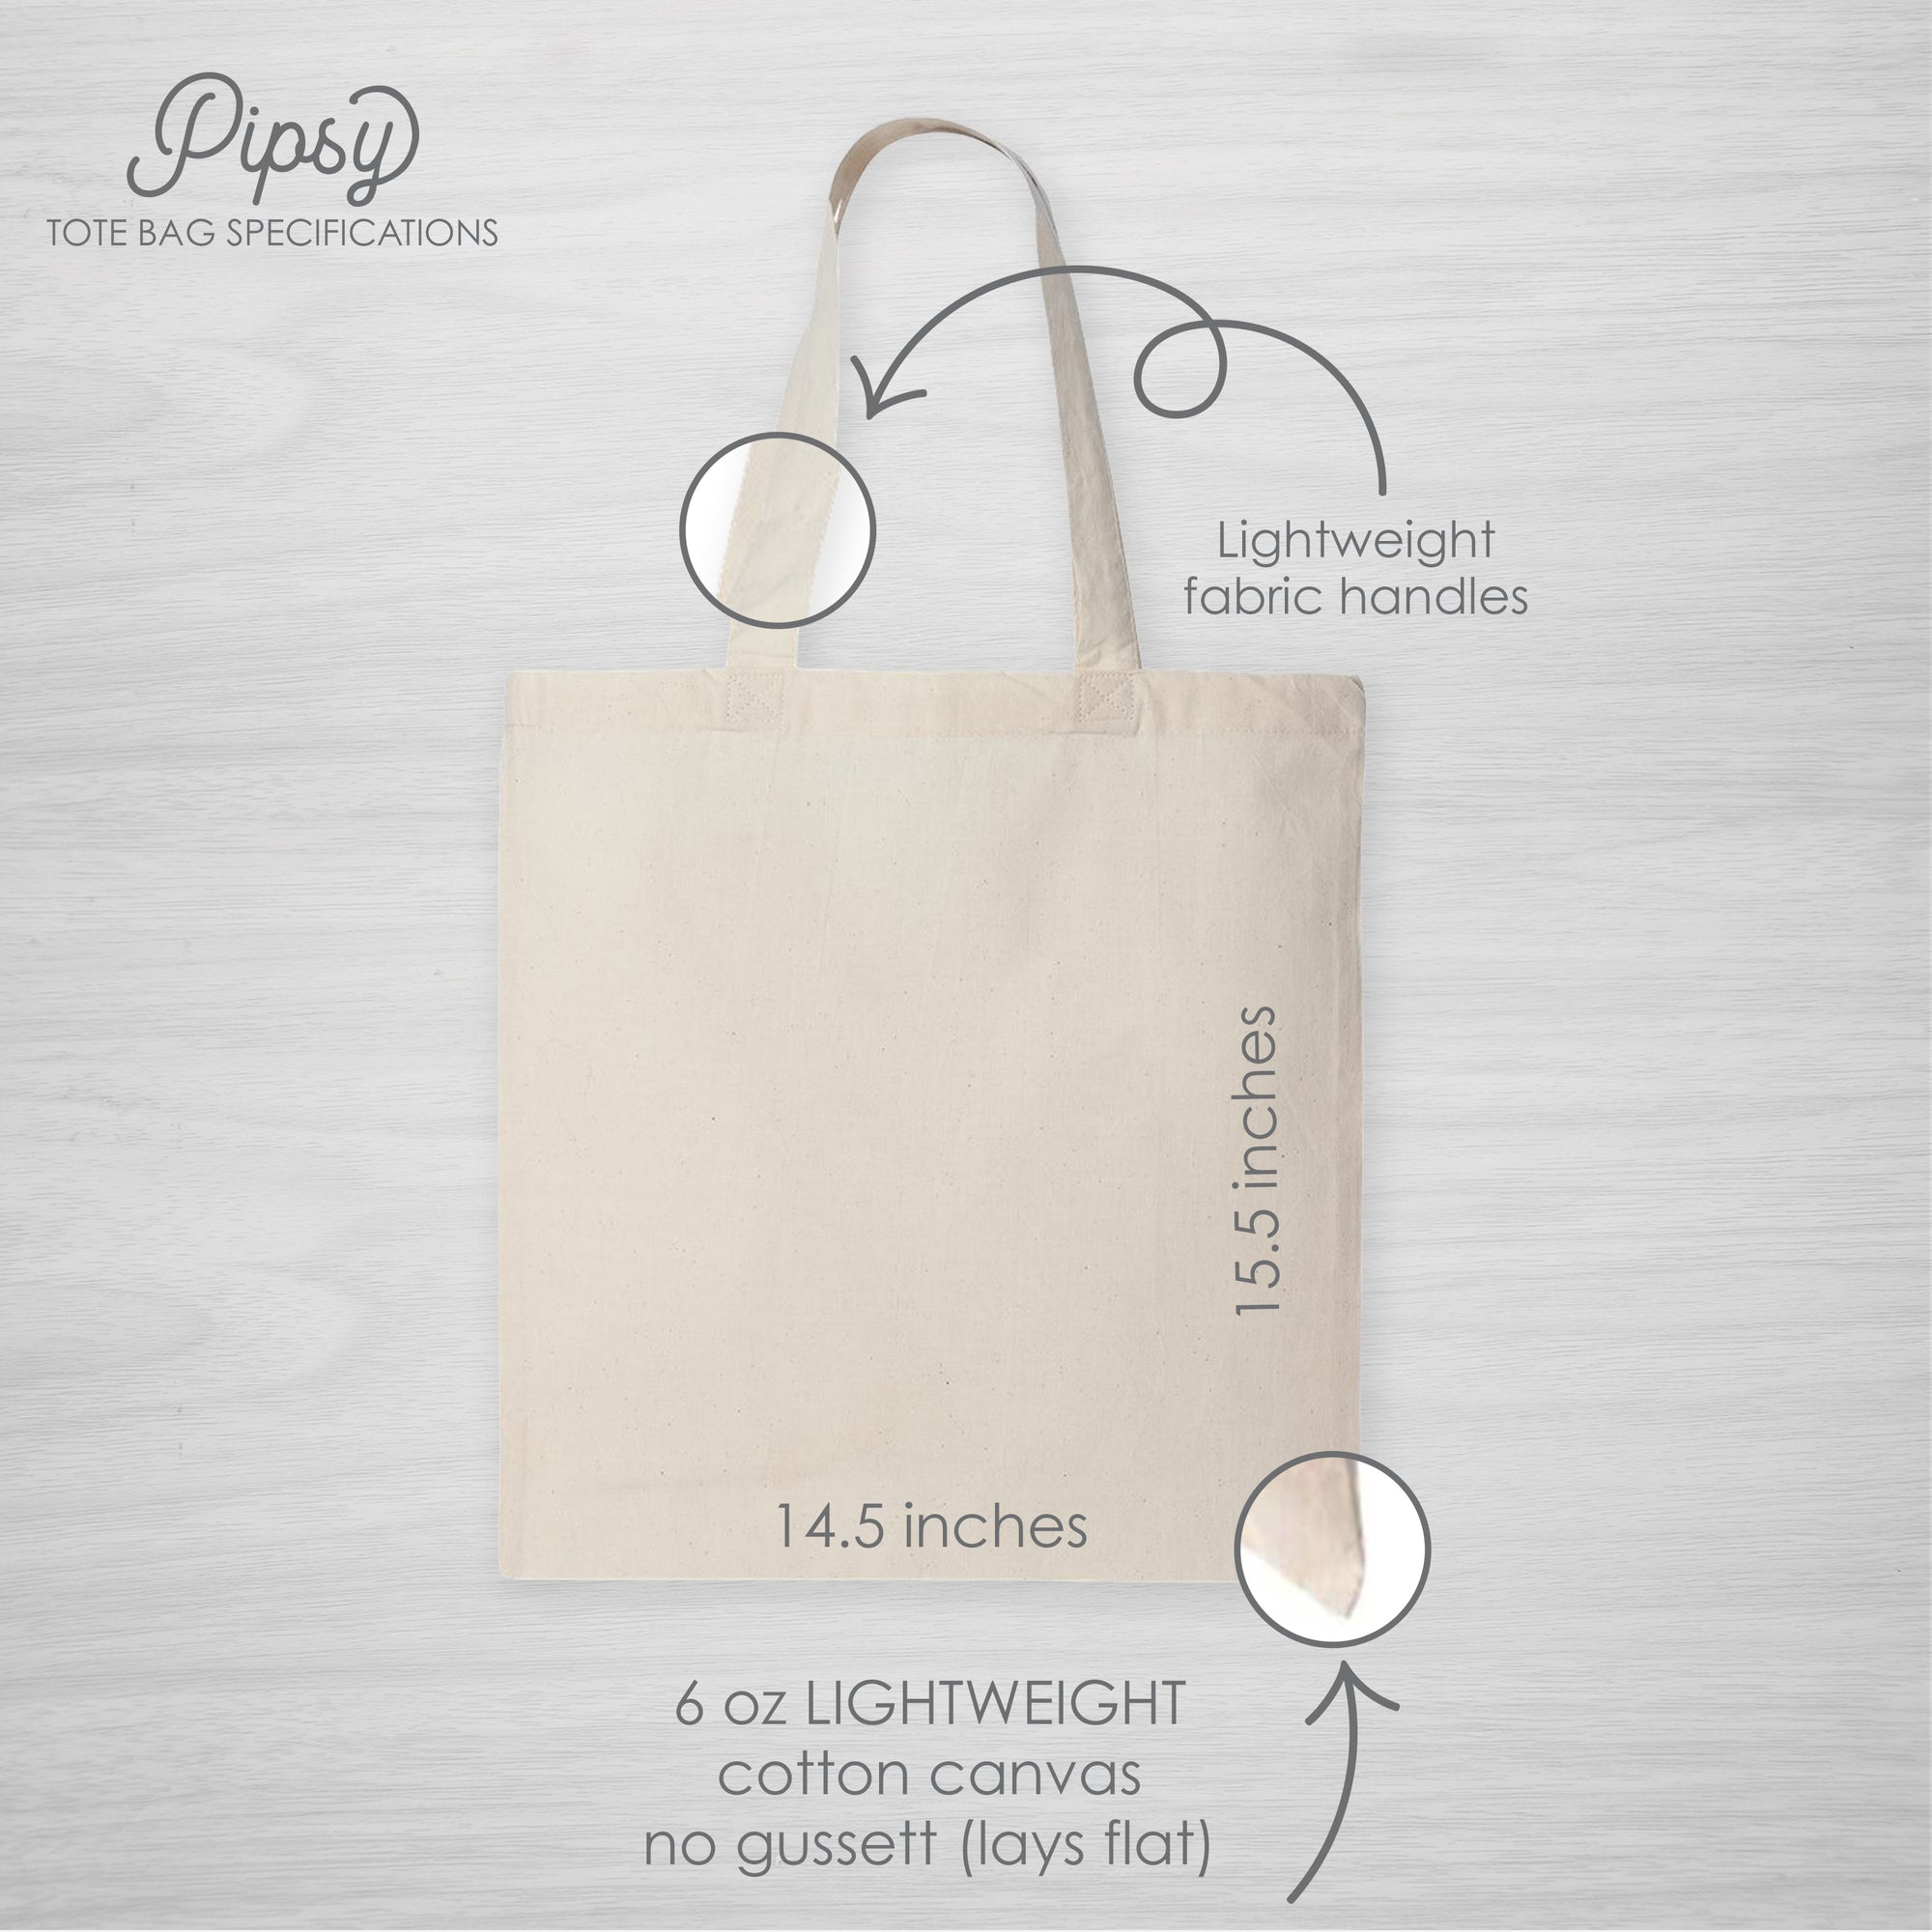 Pipsy Tote Size and Specifications